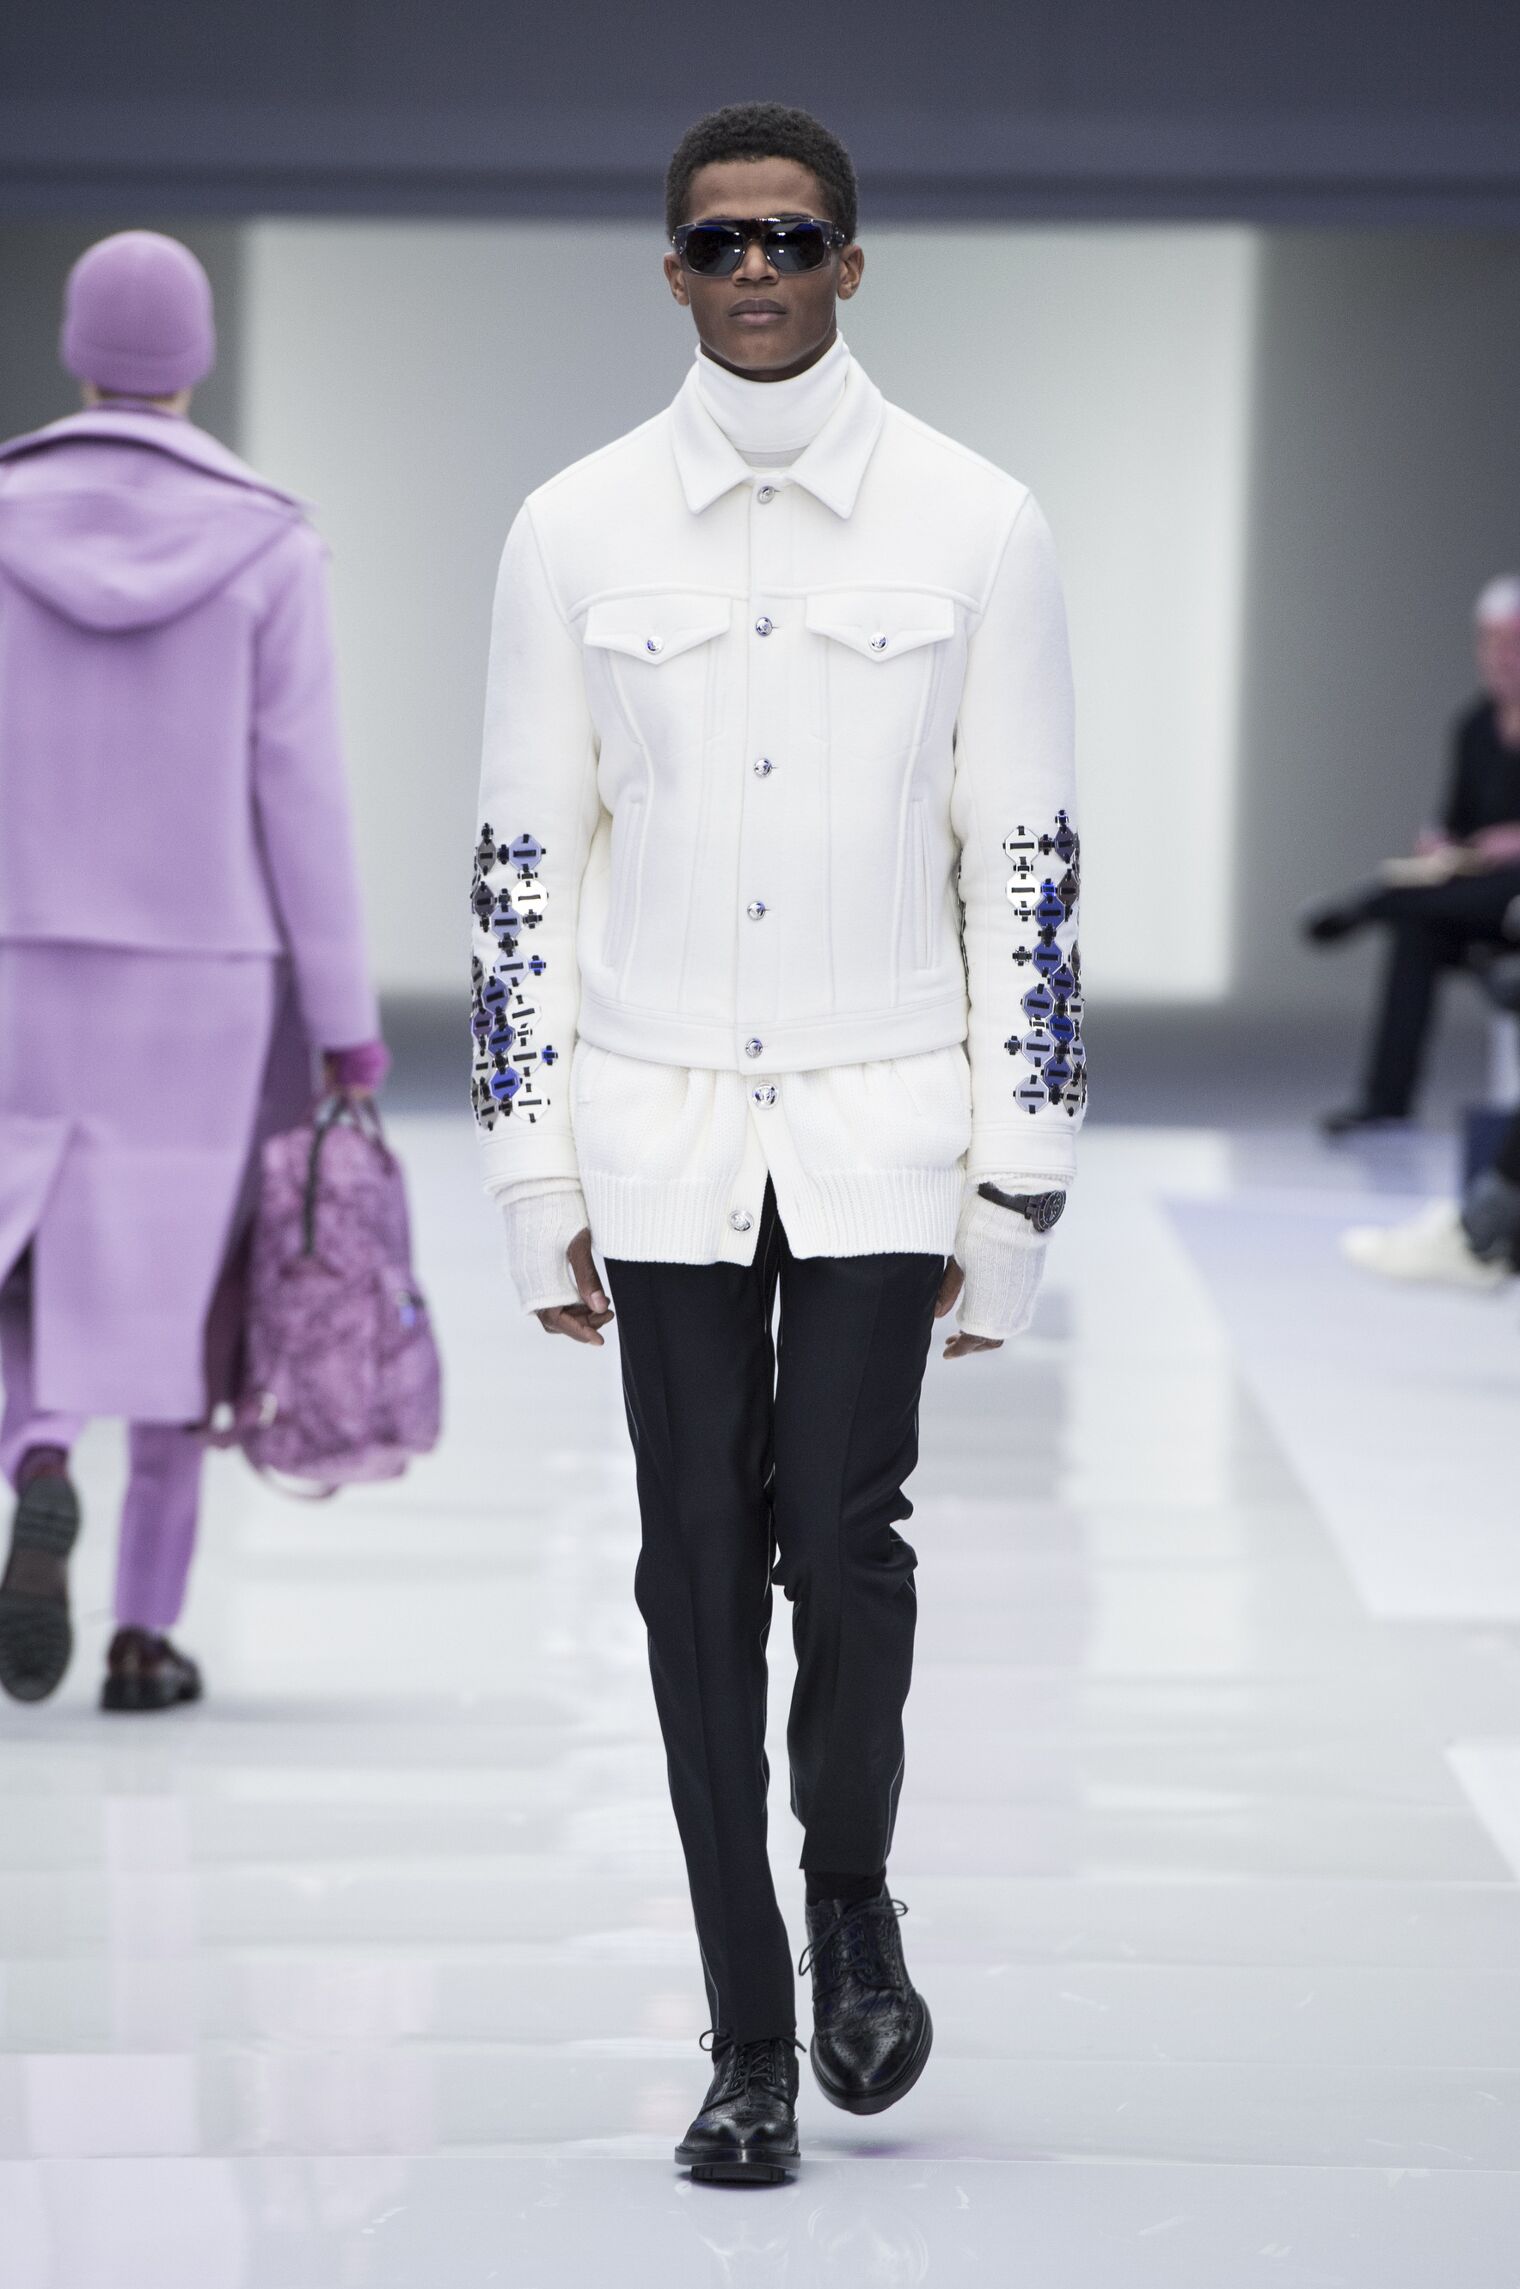 VERSACE FALL WINTER 2016-17 MEN’S COLLECTION | The Skinny Beep